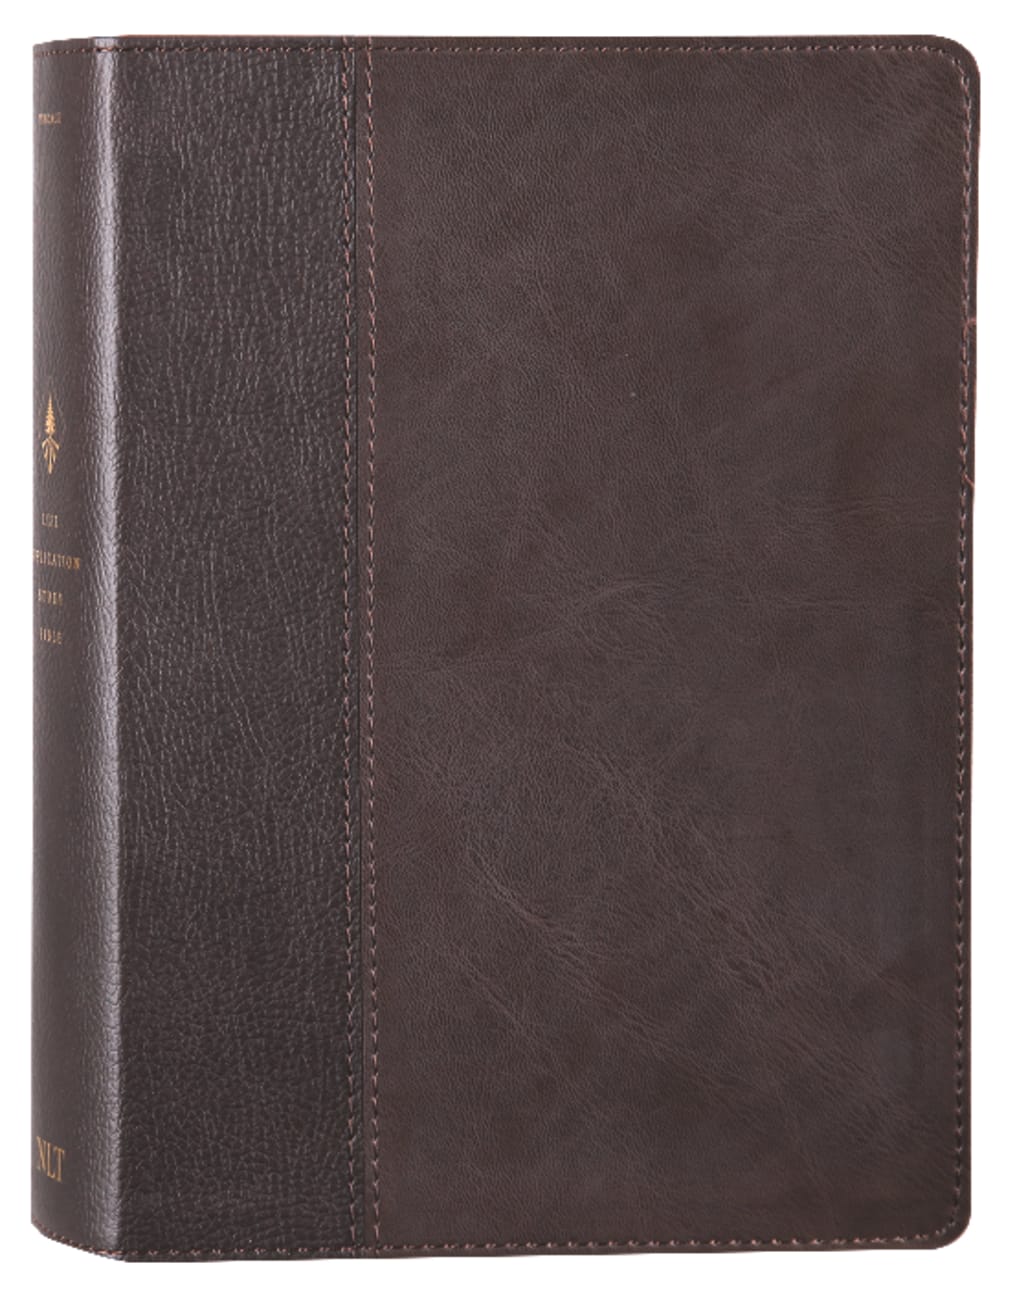 NLT Life Application Study Bible 3rd Edition Dark Brown/Brown (Black Letter Edition) Imitation Leather